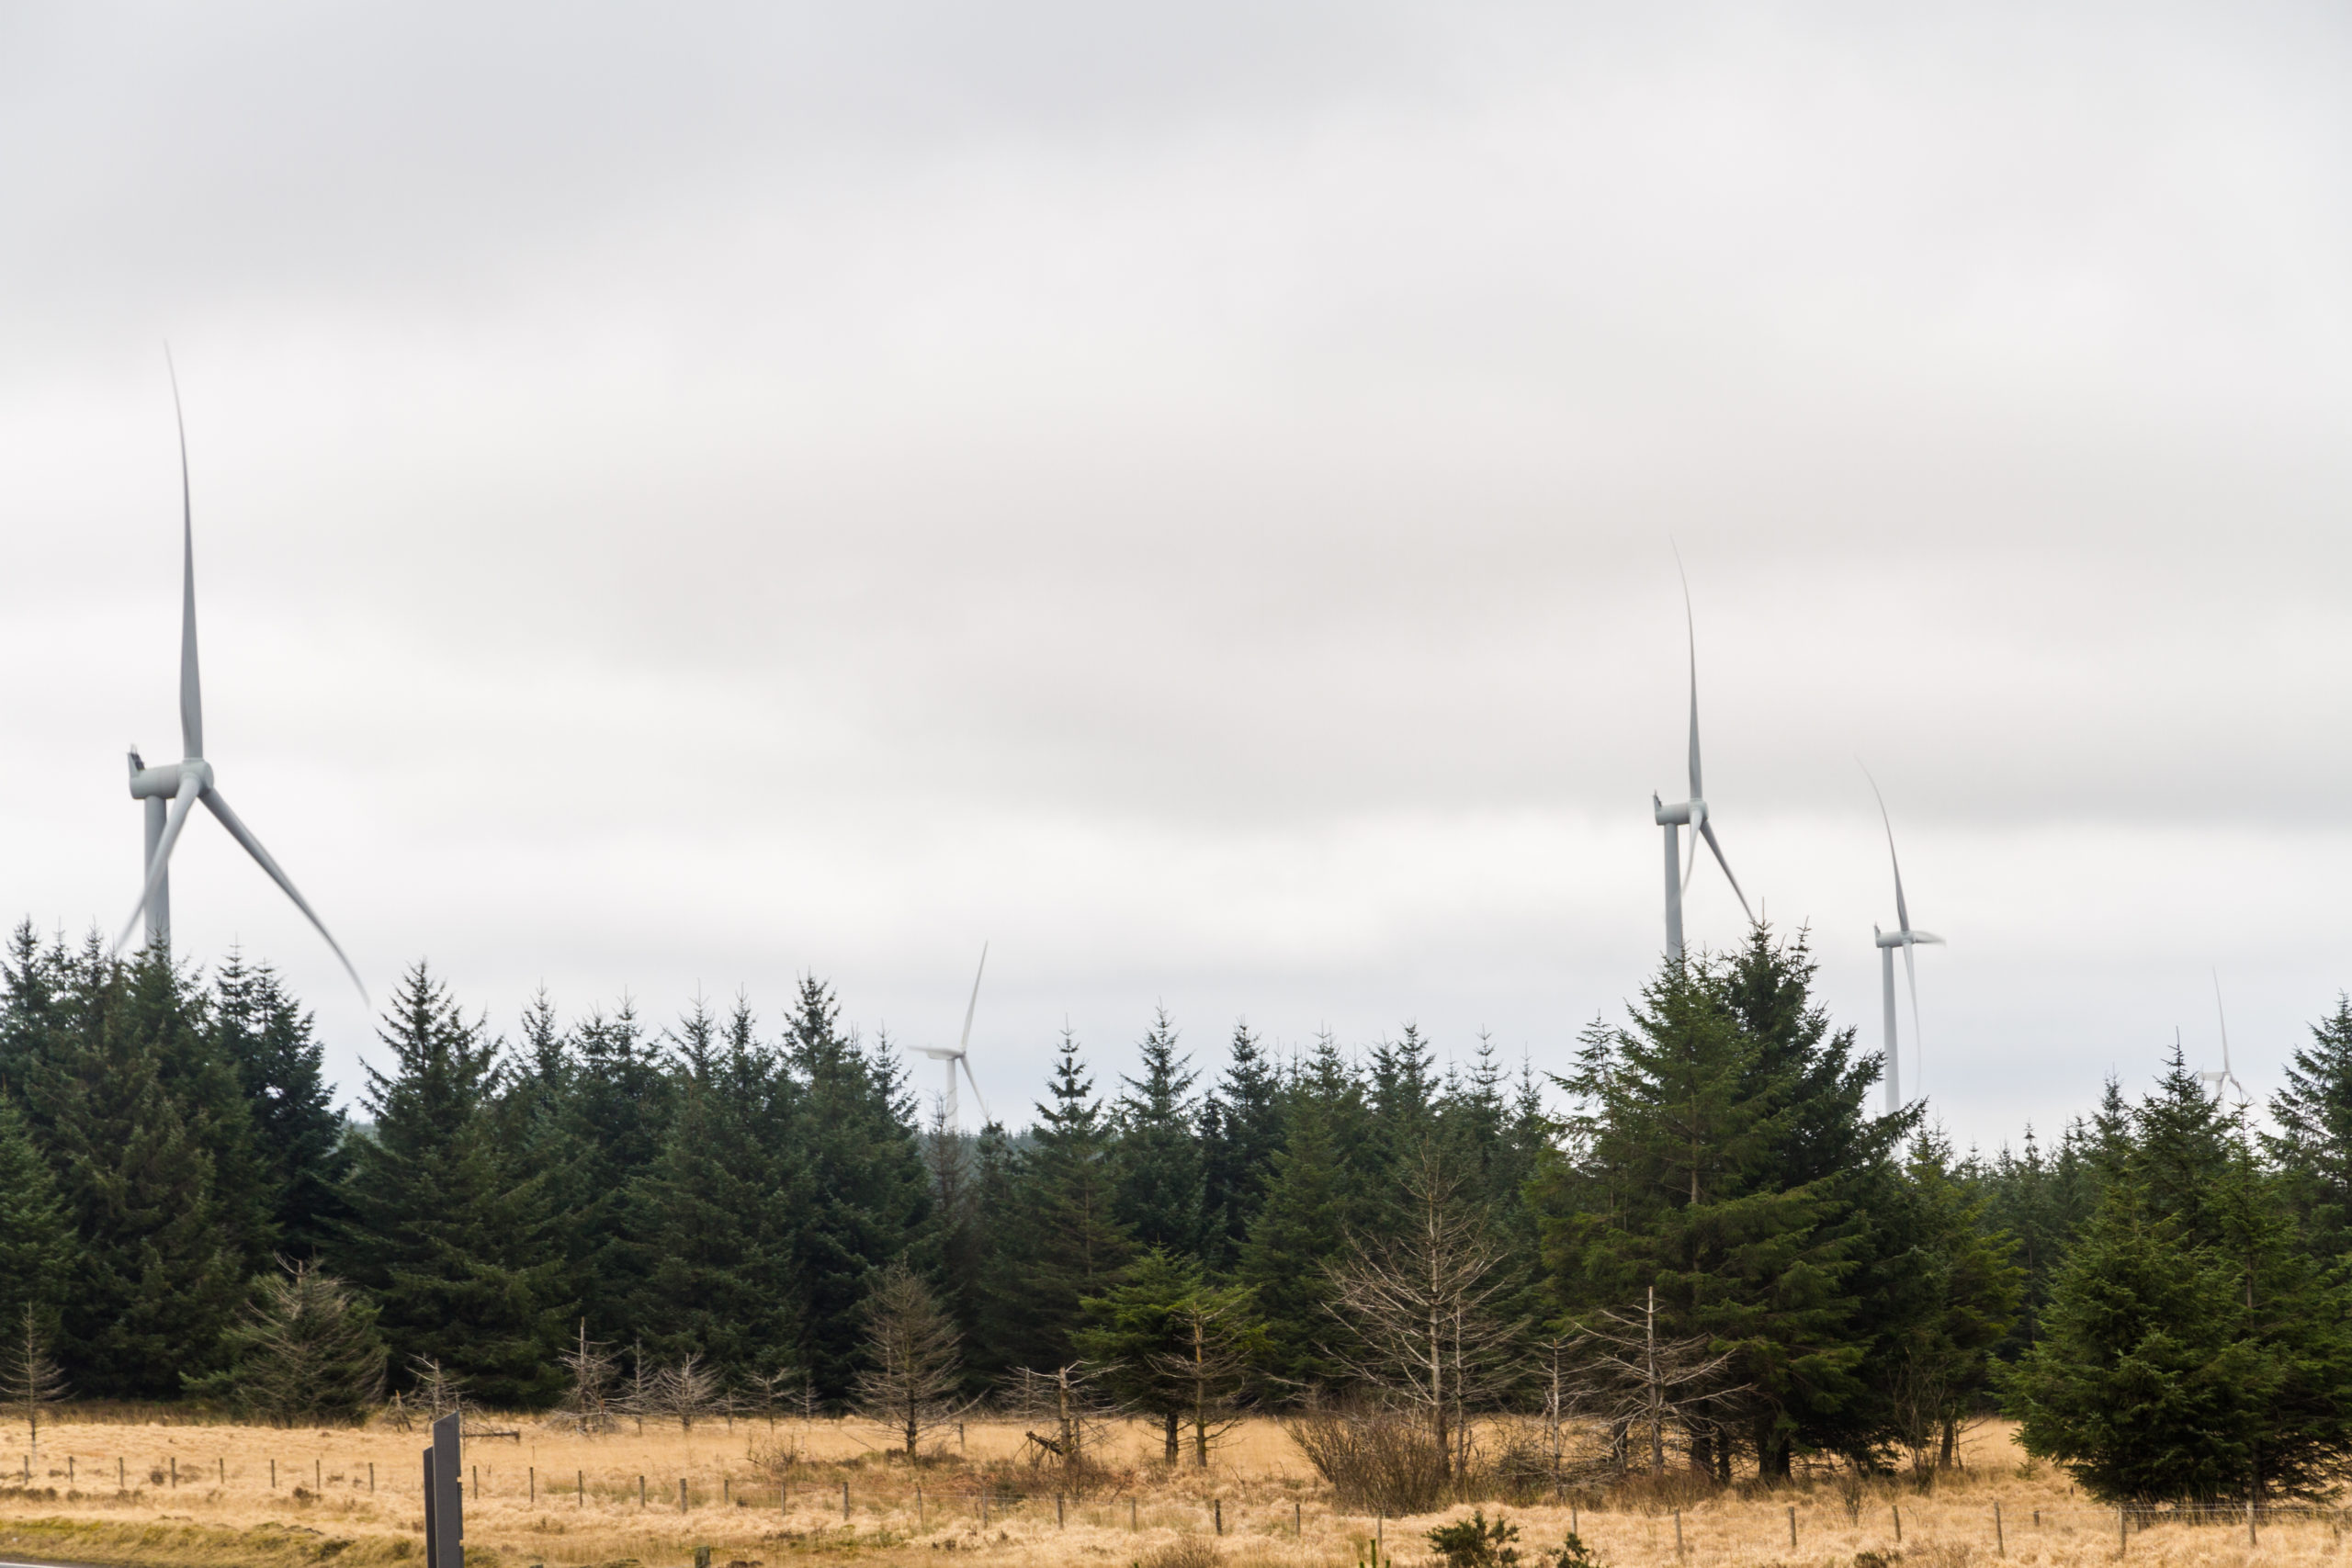 Trees making way for wind farms across the north of Scotland.